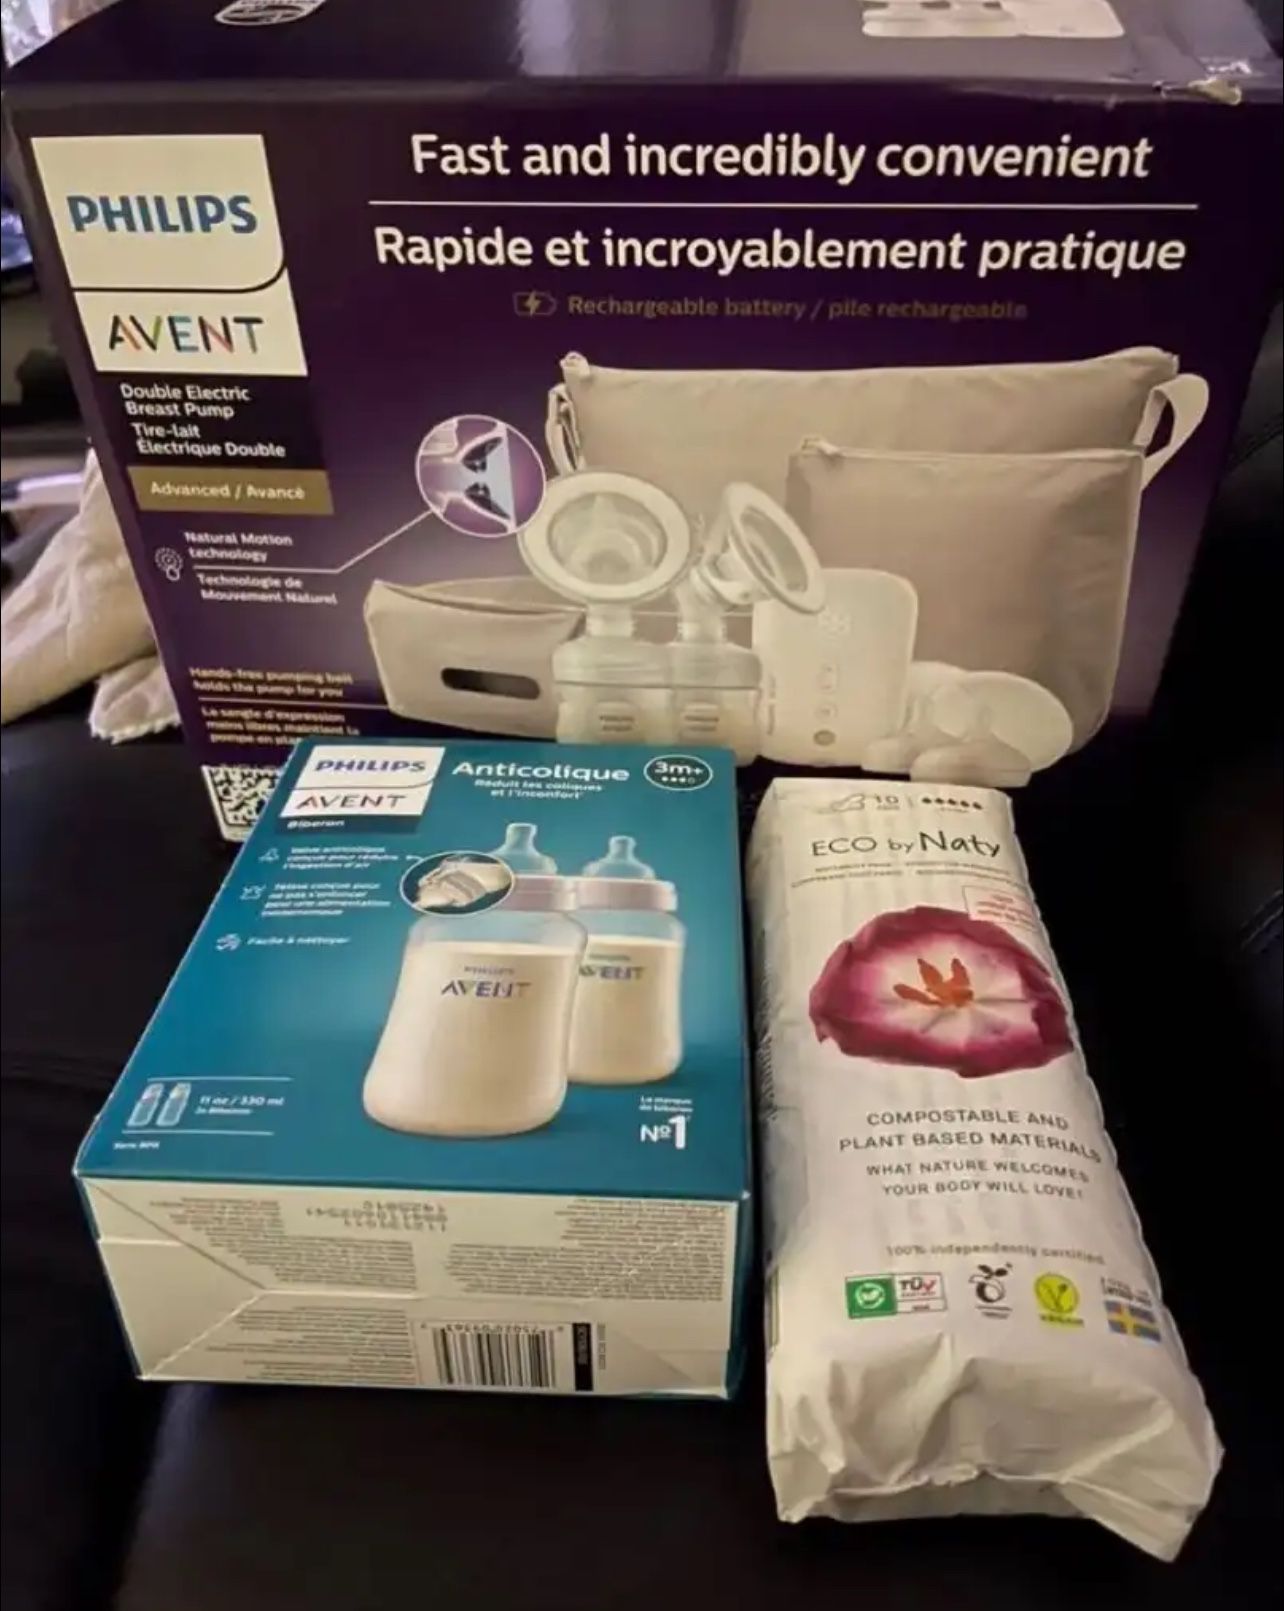 Philips Avent Double Electric Breast Pump - Brand New in Box, with free gifts